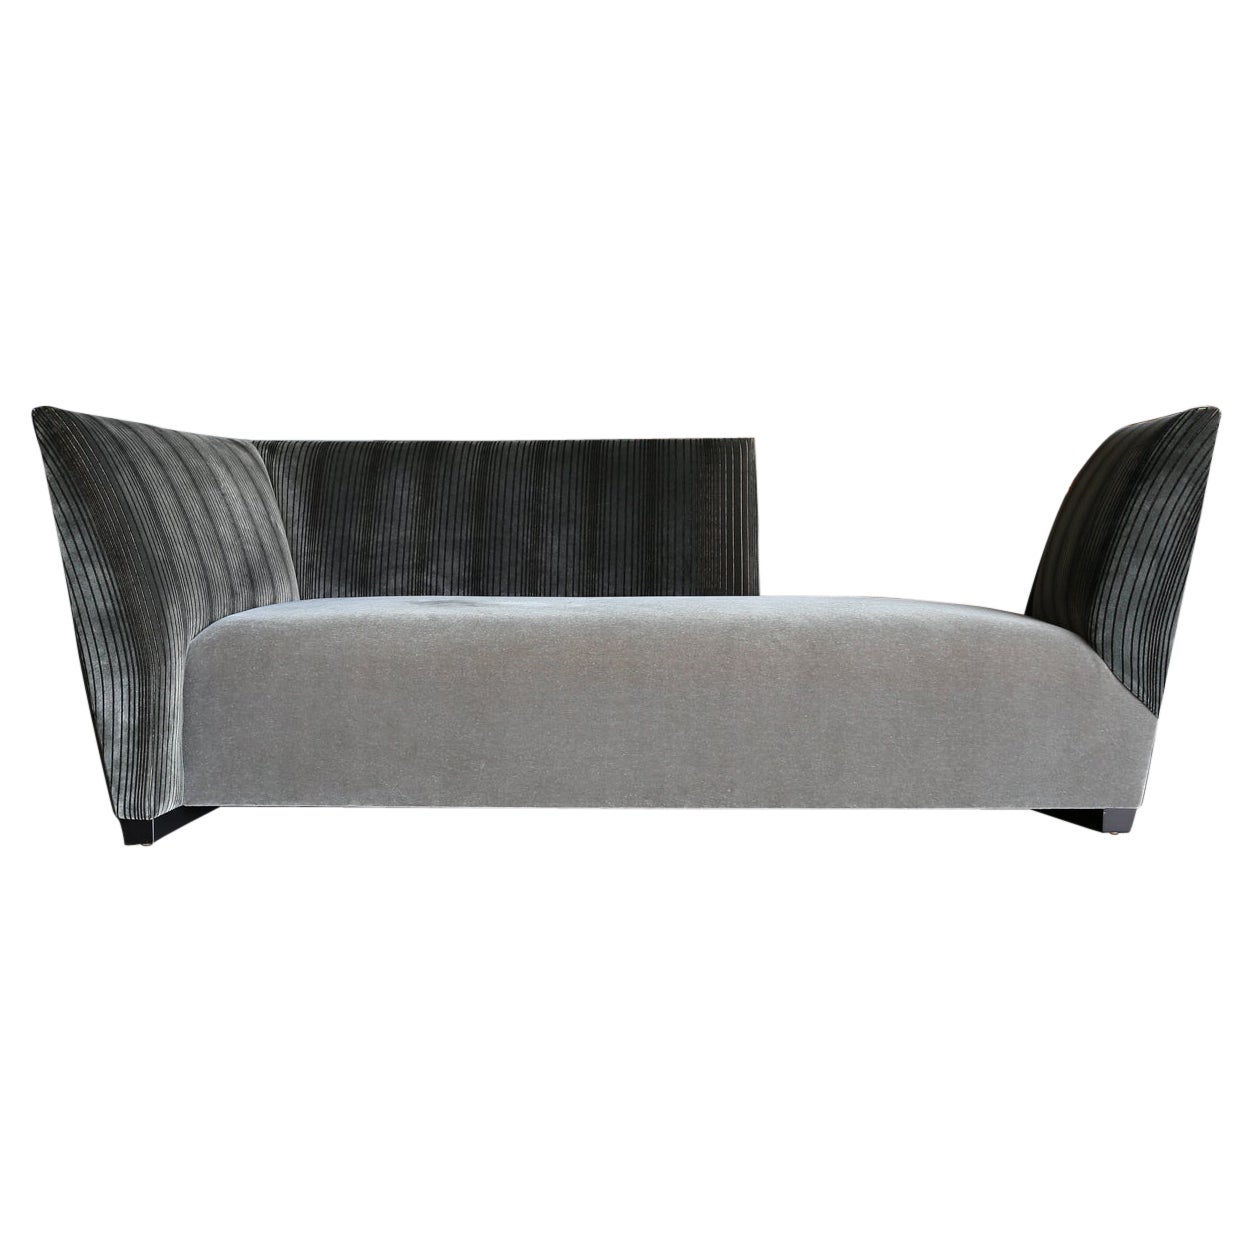 Joe D'urso Sculptural Sofa for Donghia, 1990's For Sale at 1stDibs